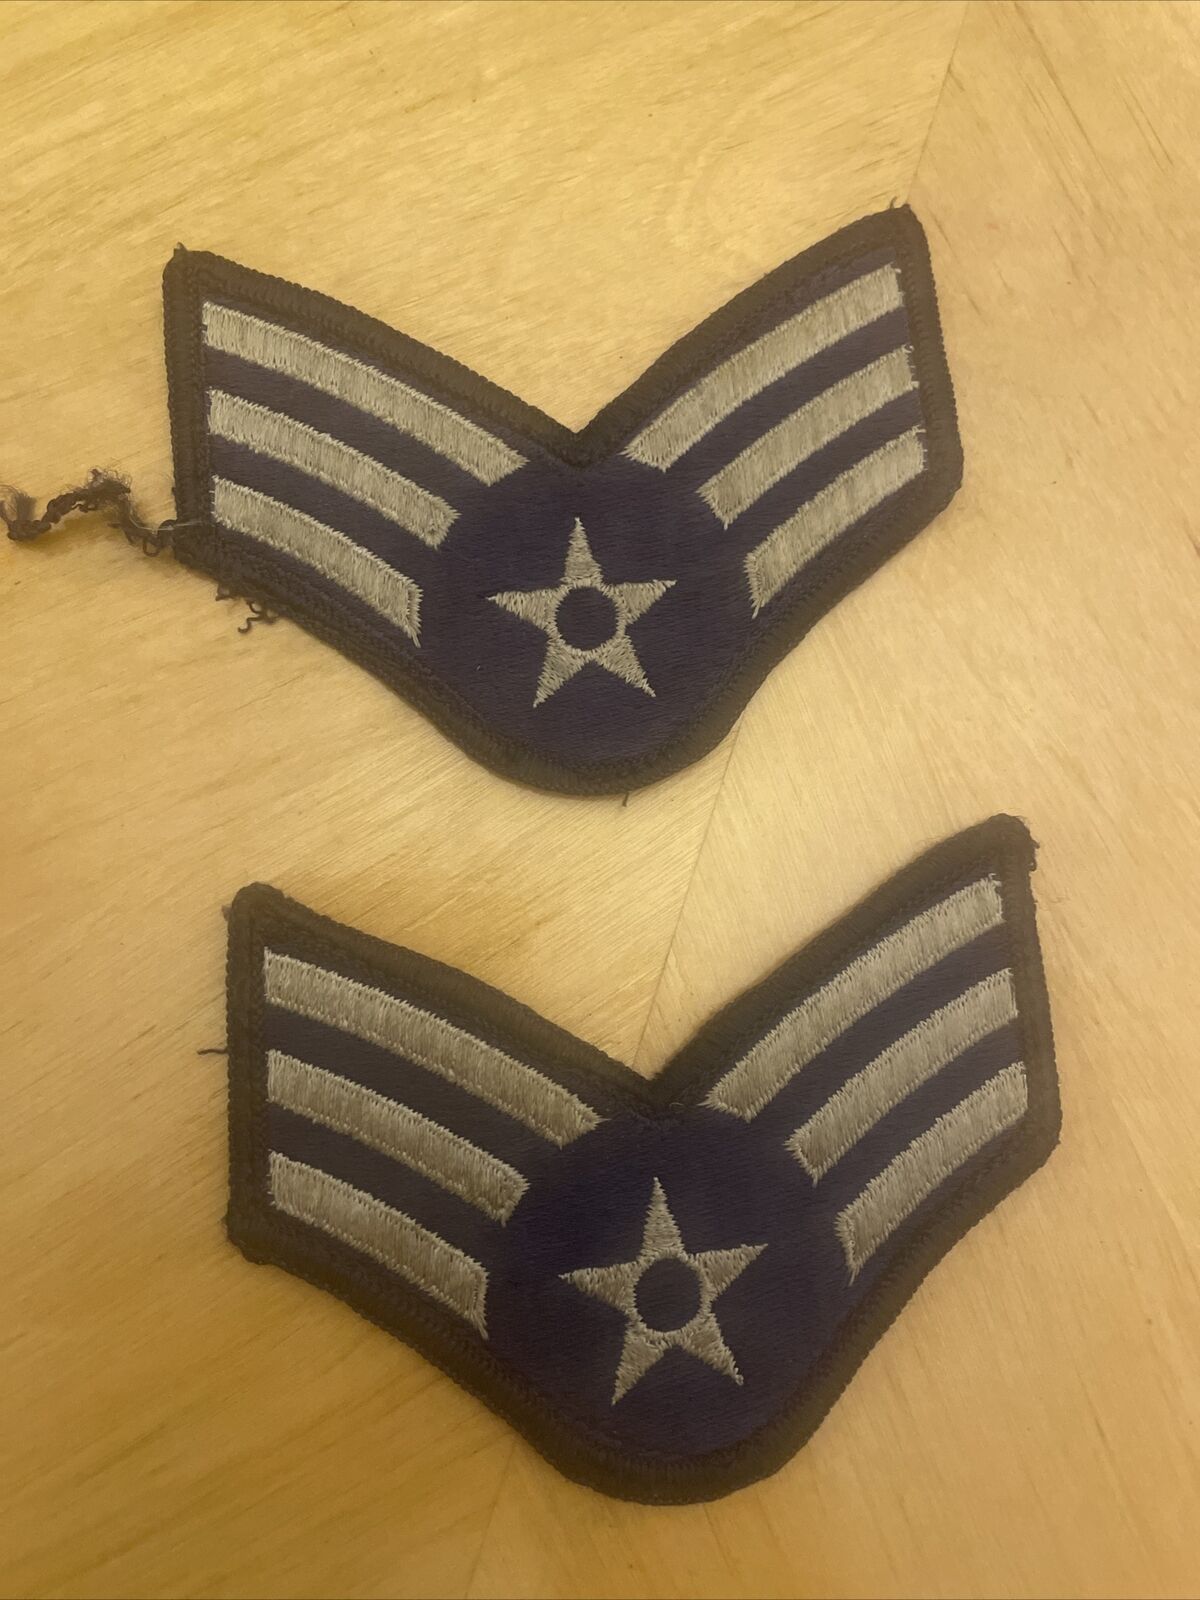 Vintage Air Force USAF patches (2)